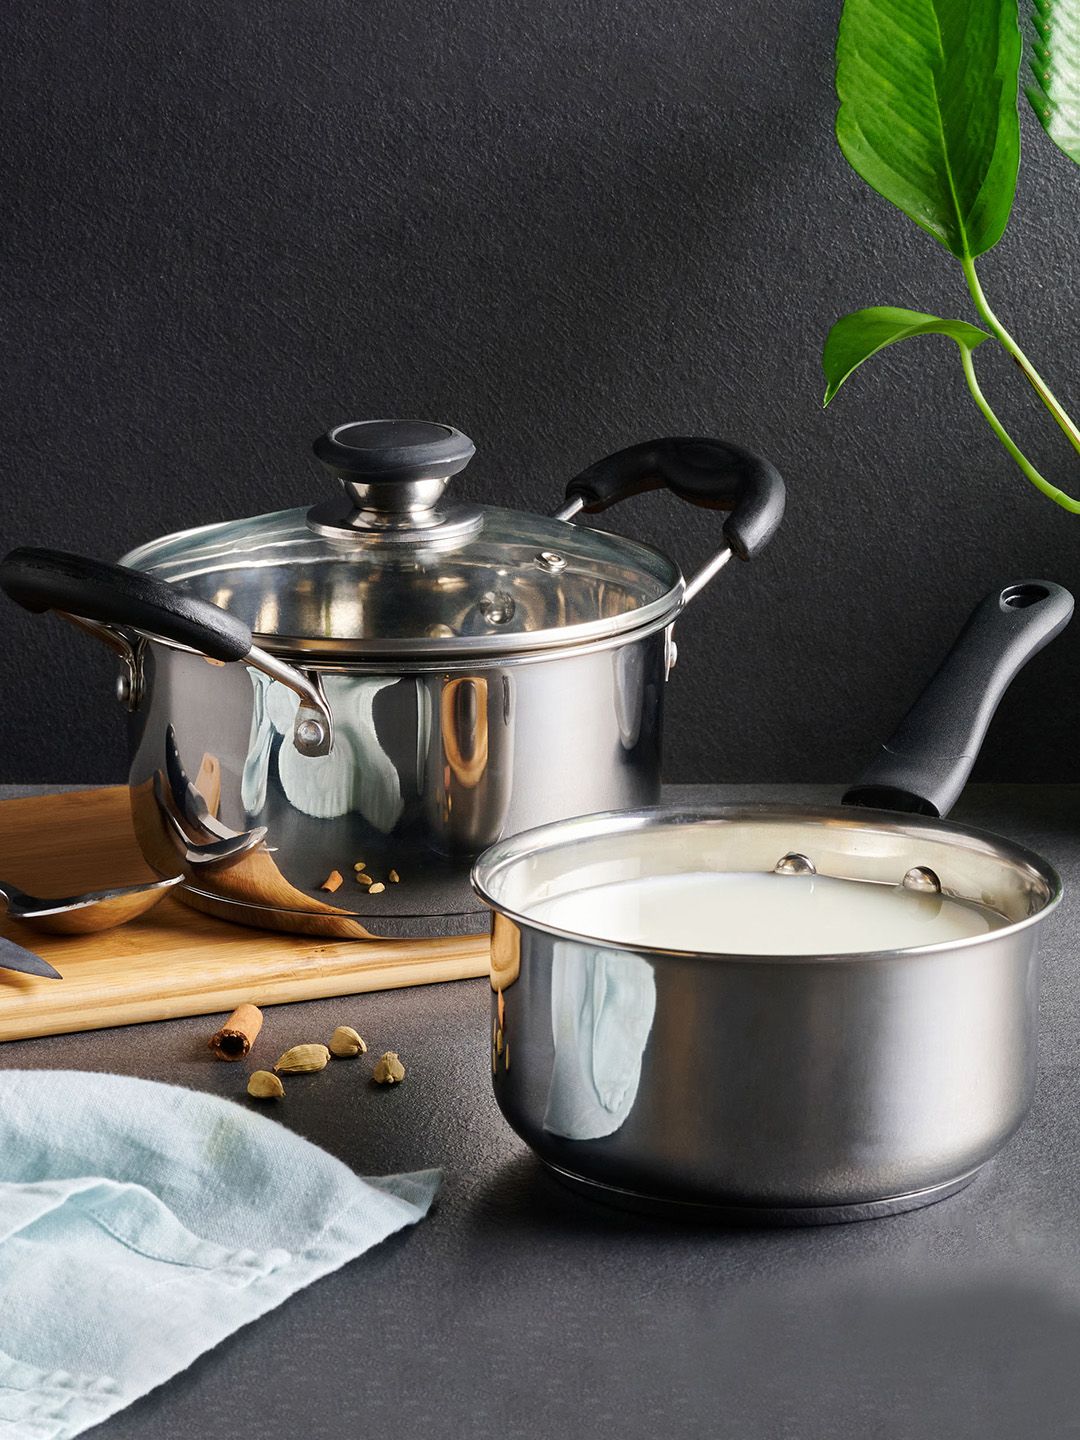 Home Centre Set Of 3 Solid Stainless Steel Cookware Set Price in India